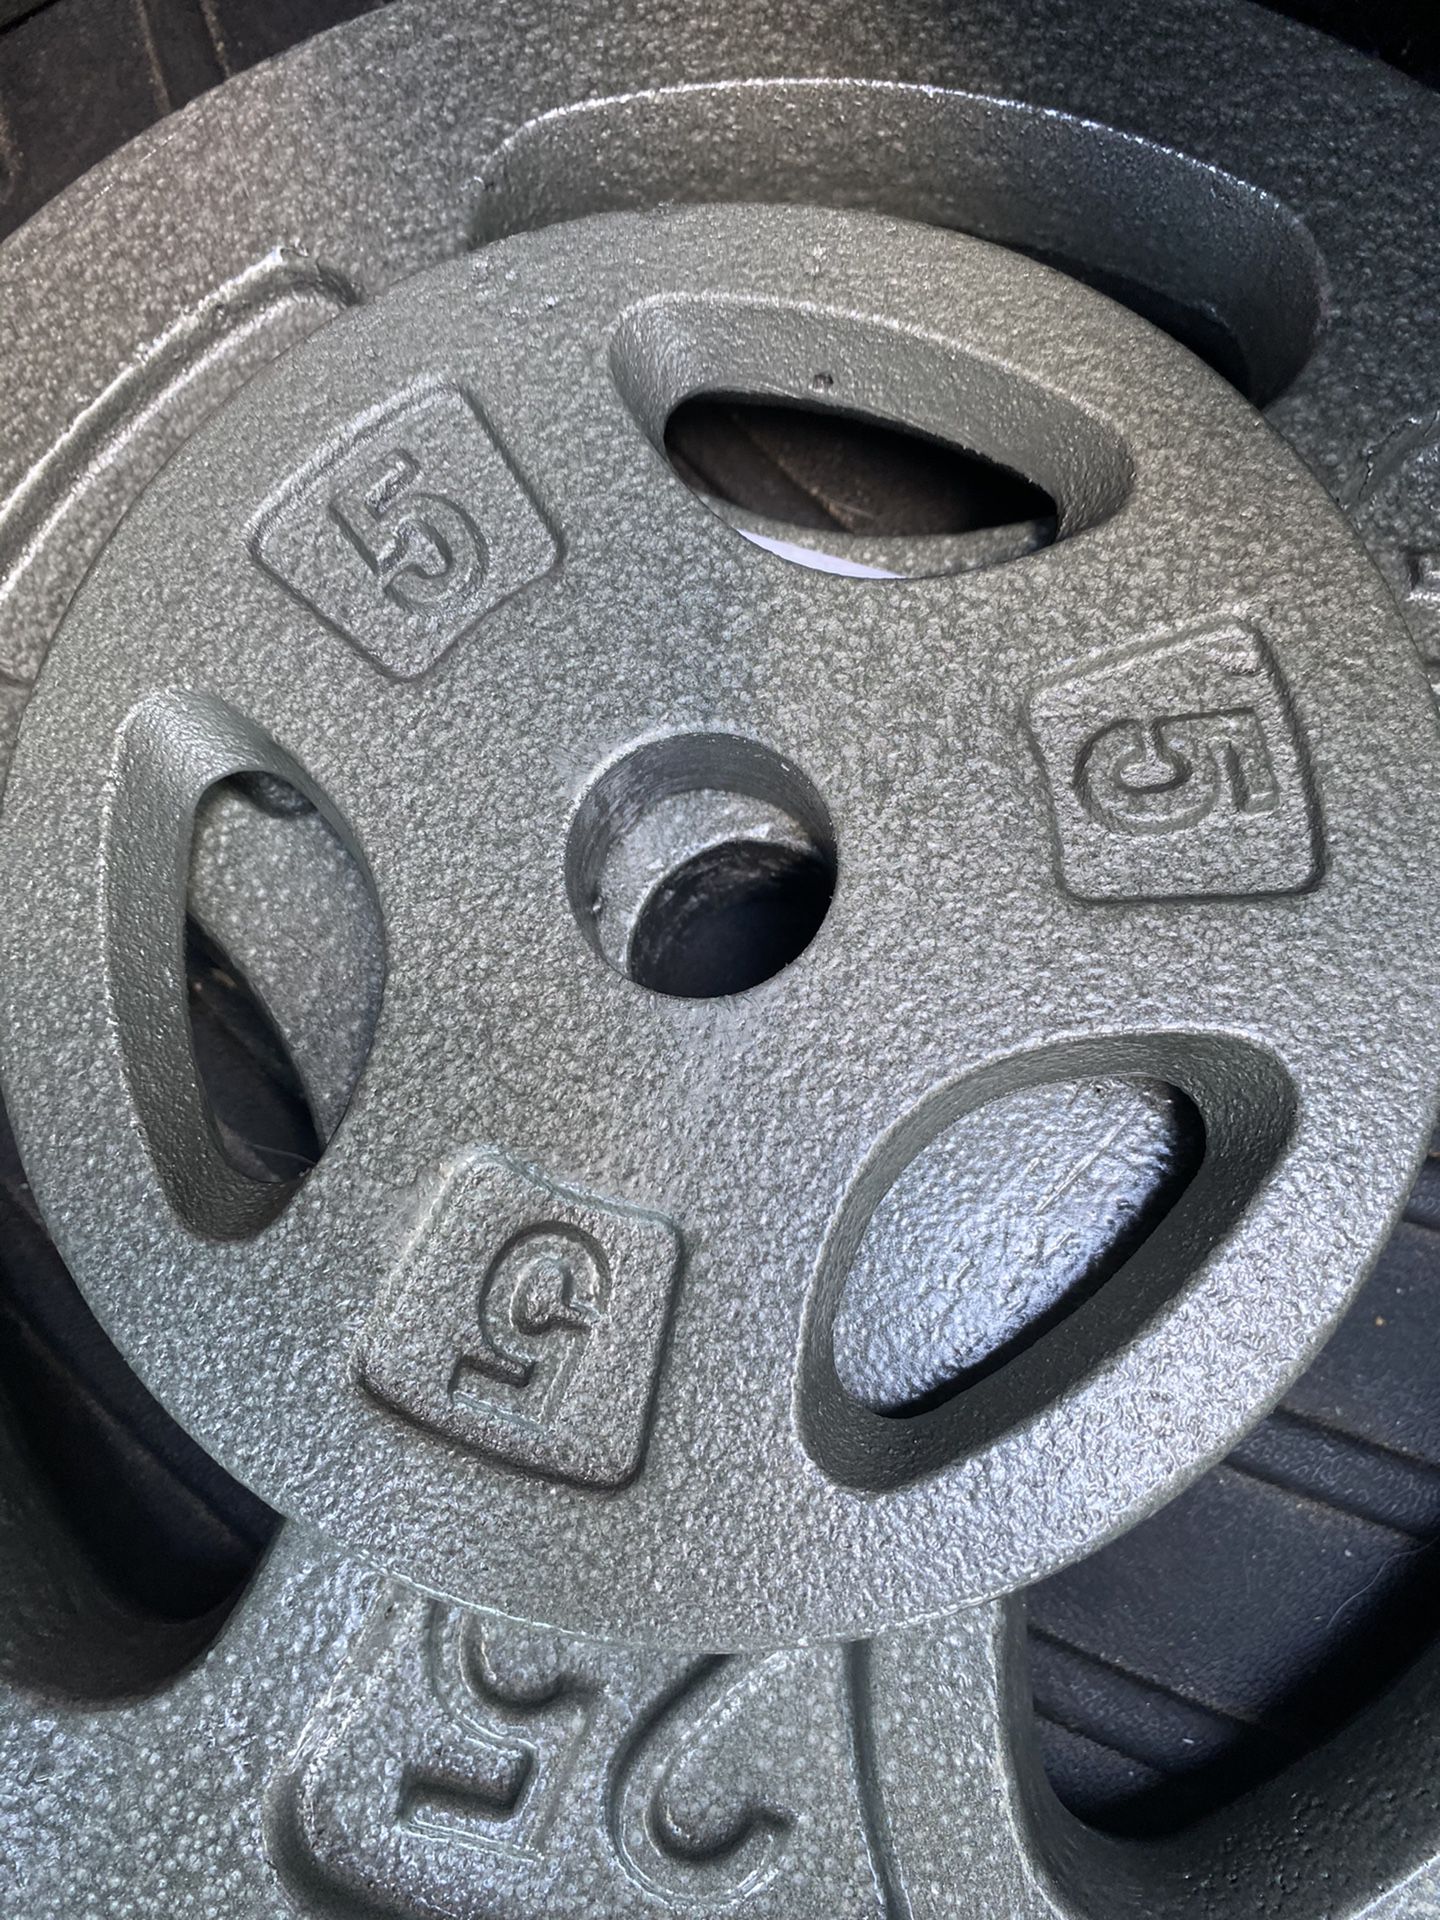 Brand new 5 pound weight plate, each, 1 inch hole